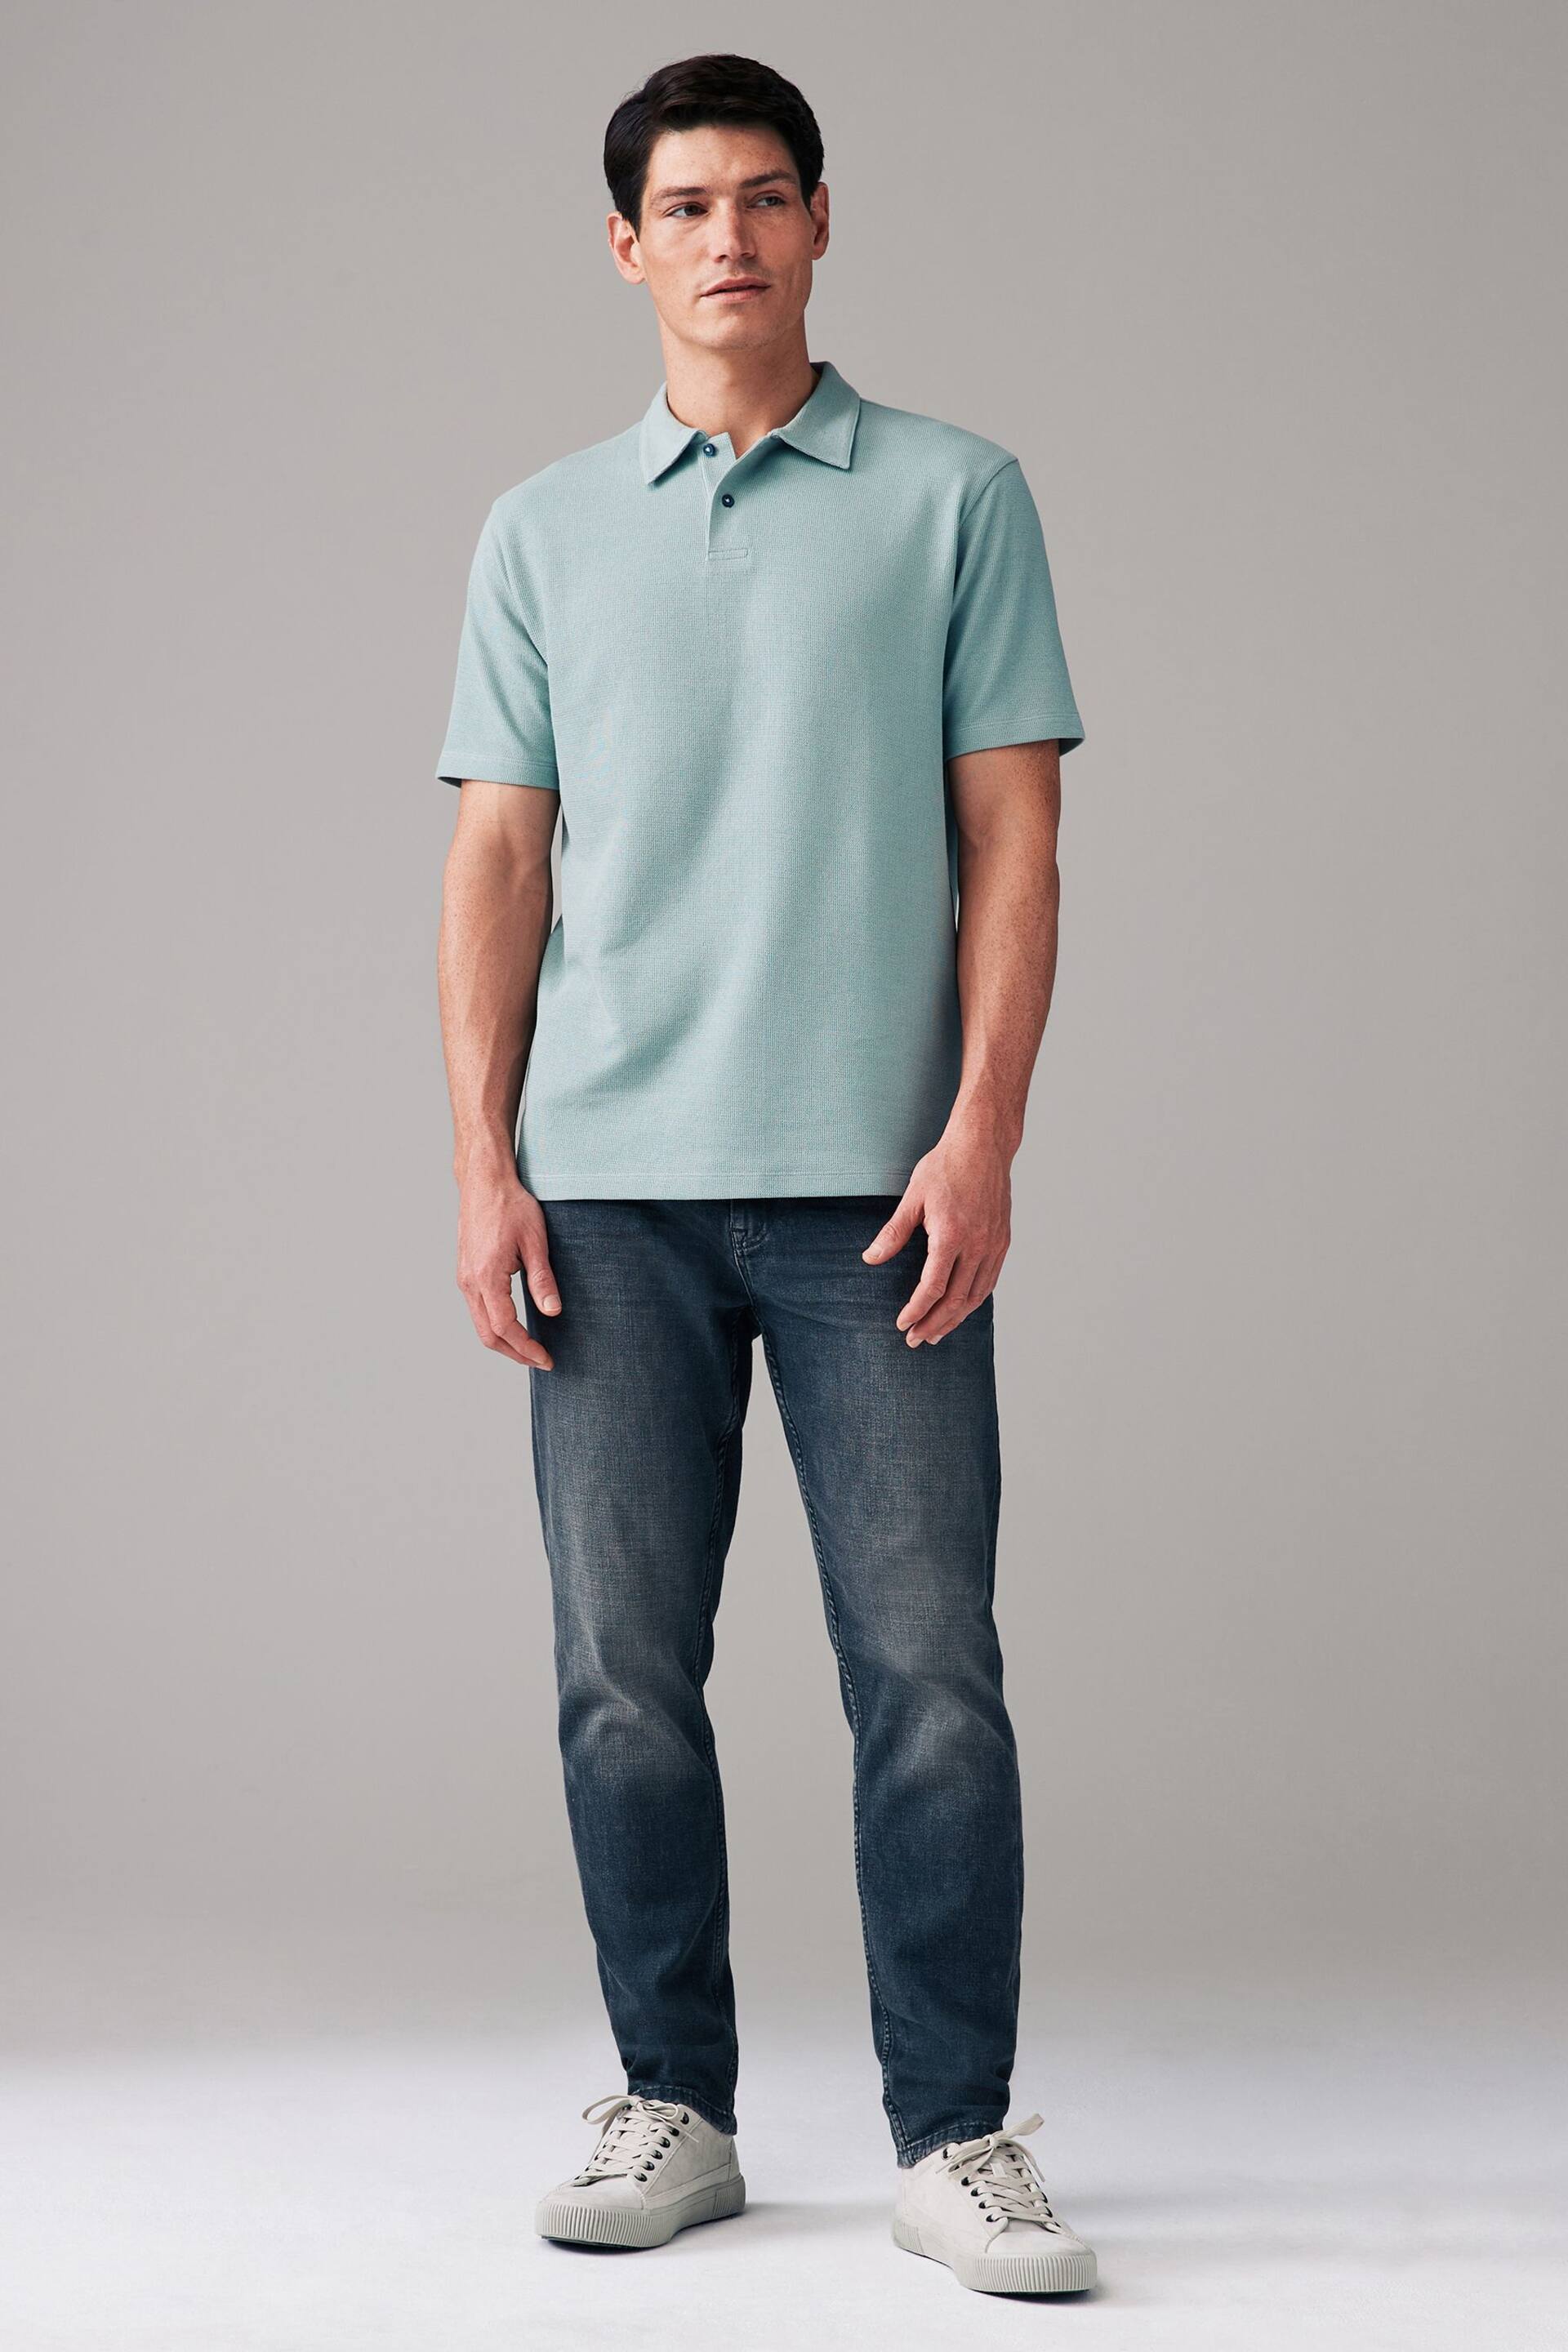 Green Textured Short Sleeve Polo Shirt - Image 2 of 8